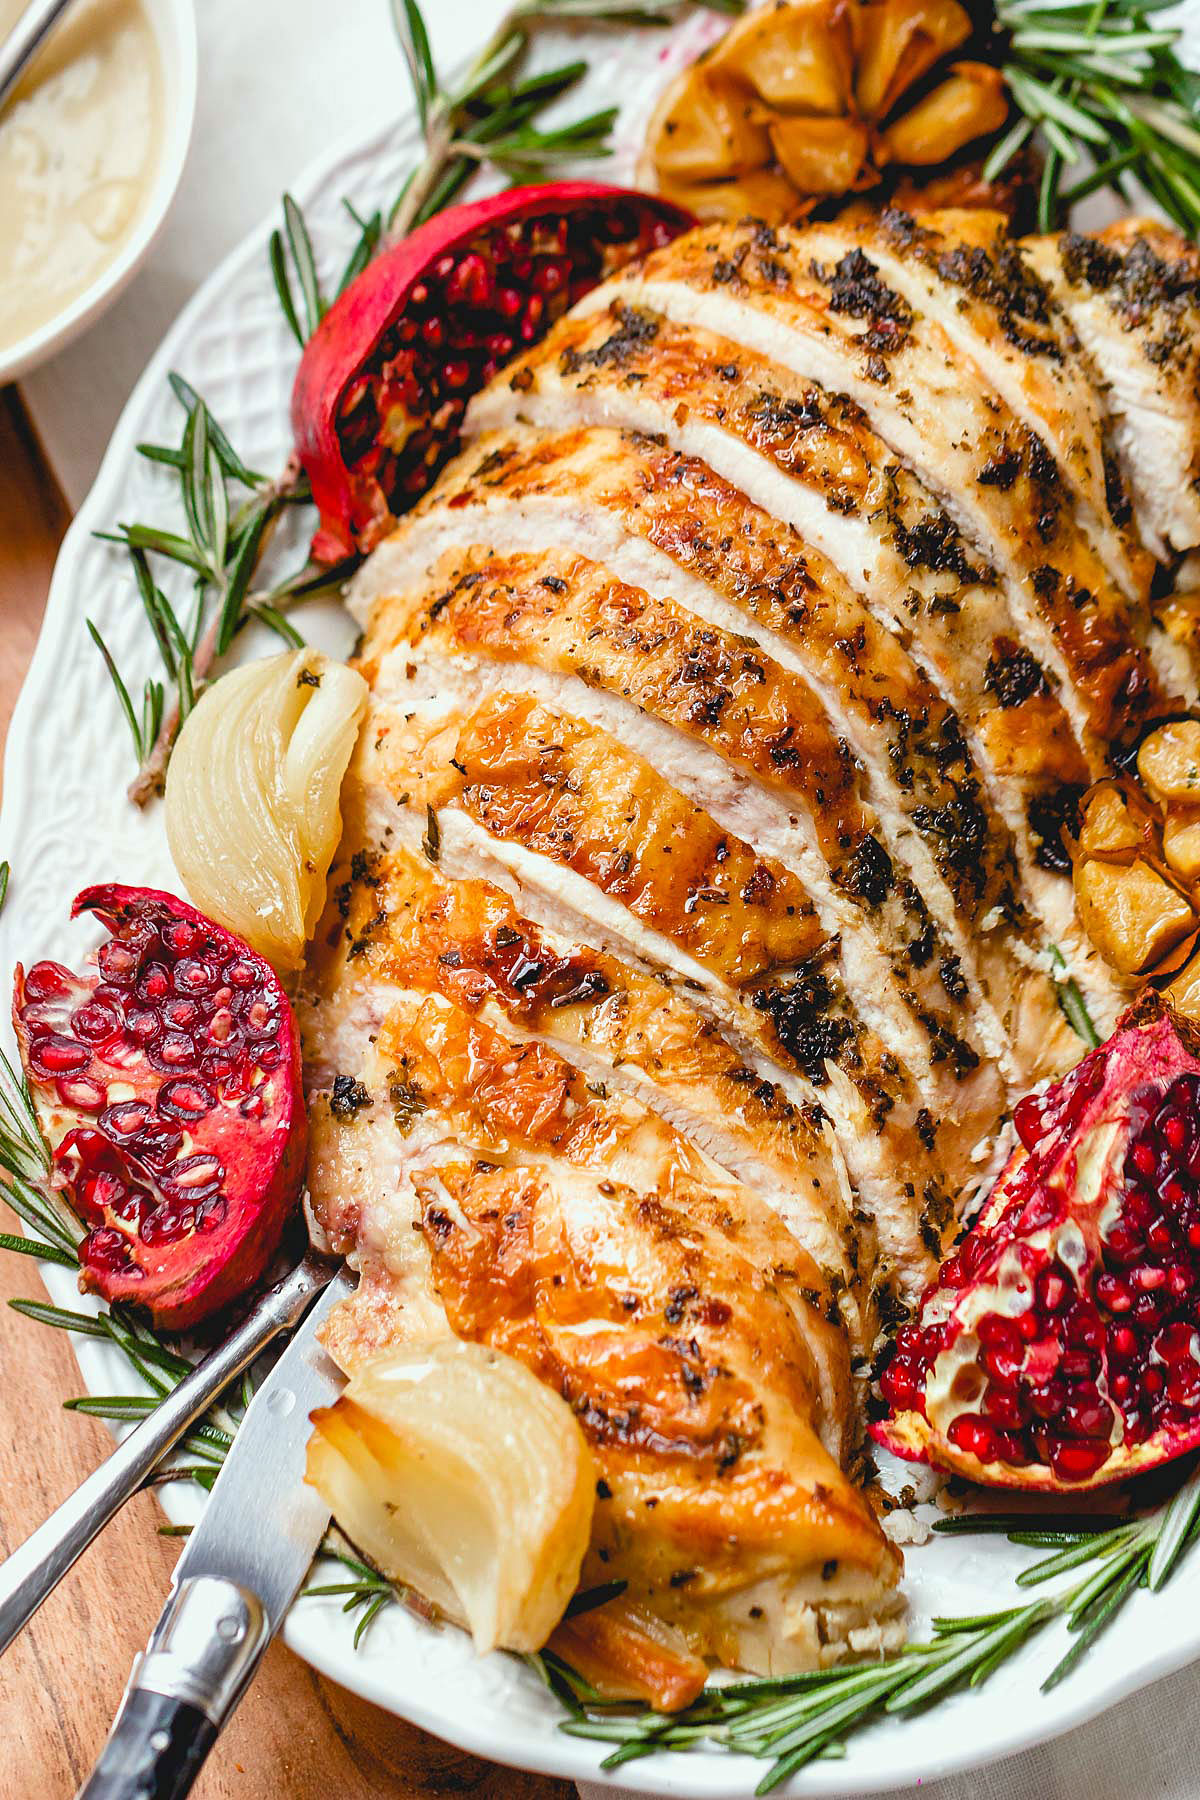 Turkey Recipes 20 Easy And Delicious Turkey Recipes For Any Occasion